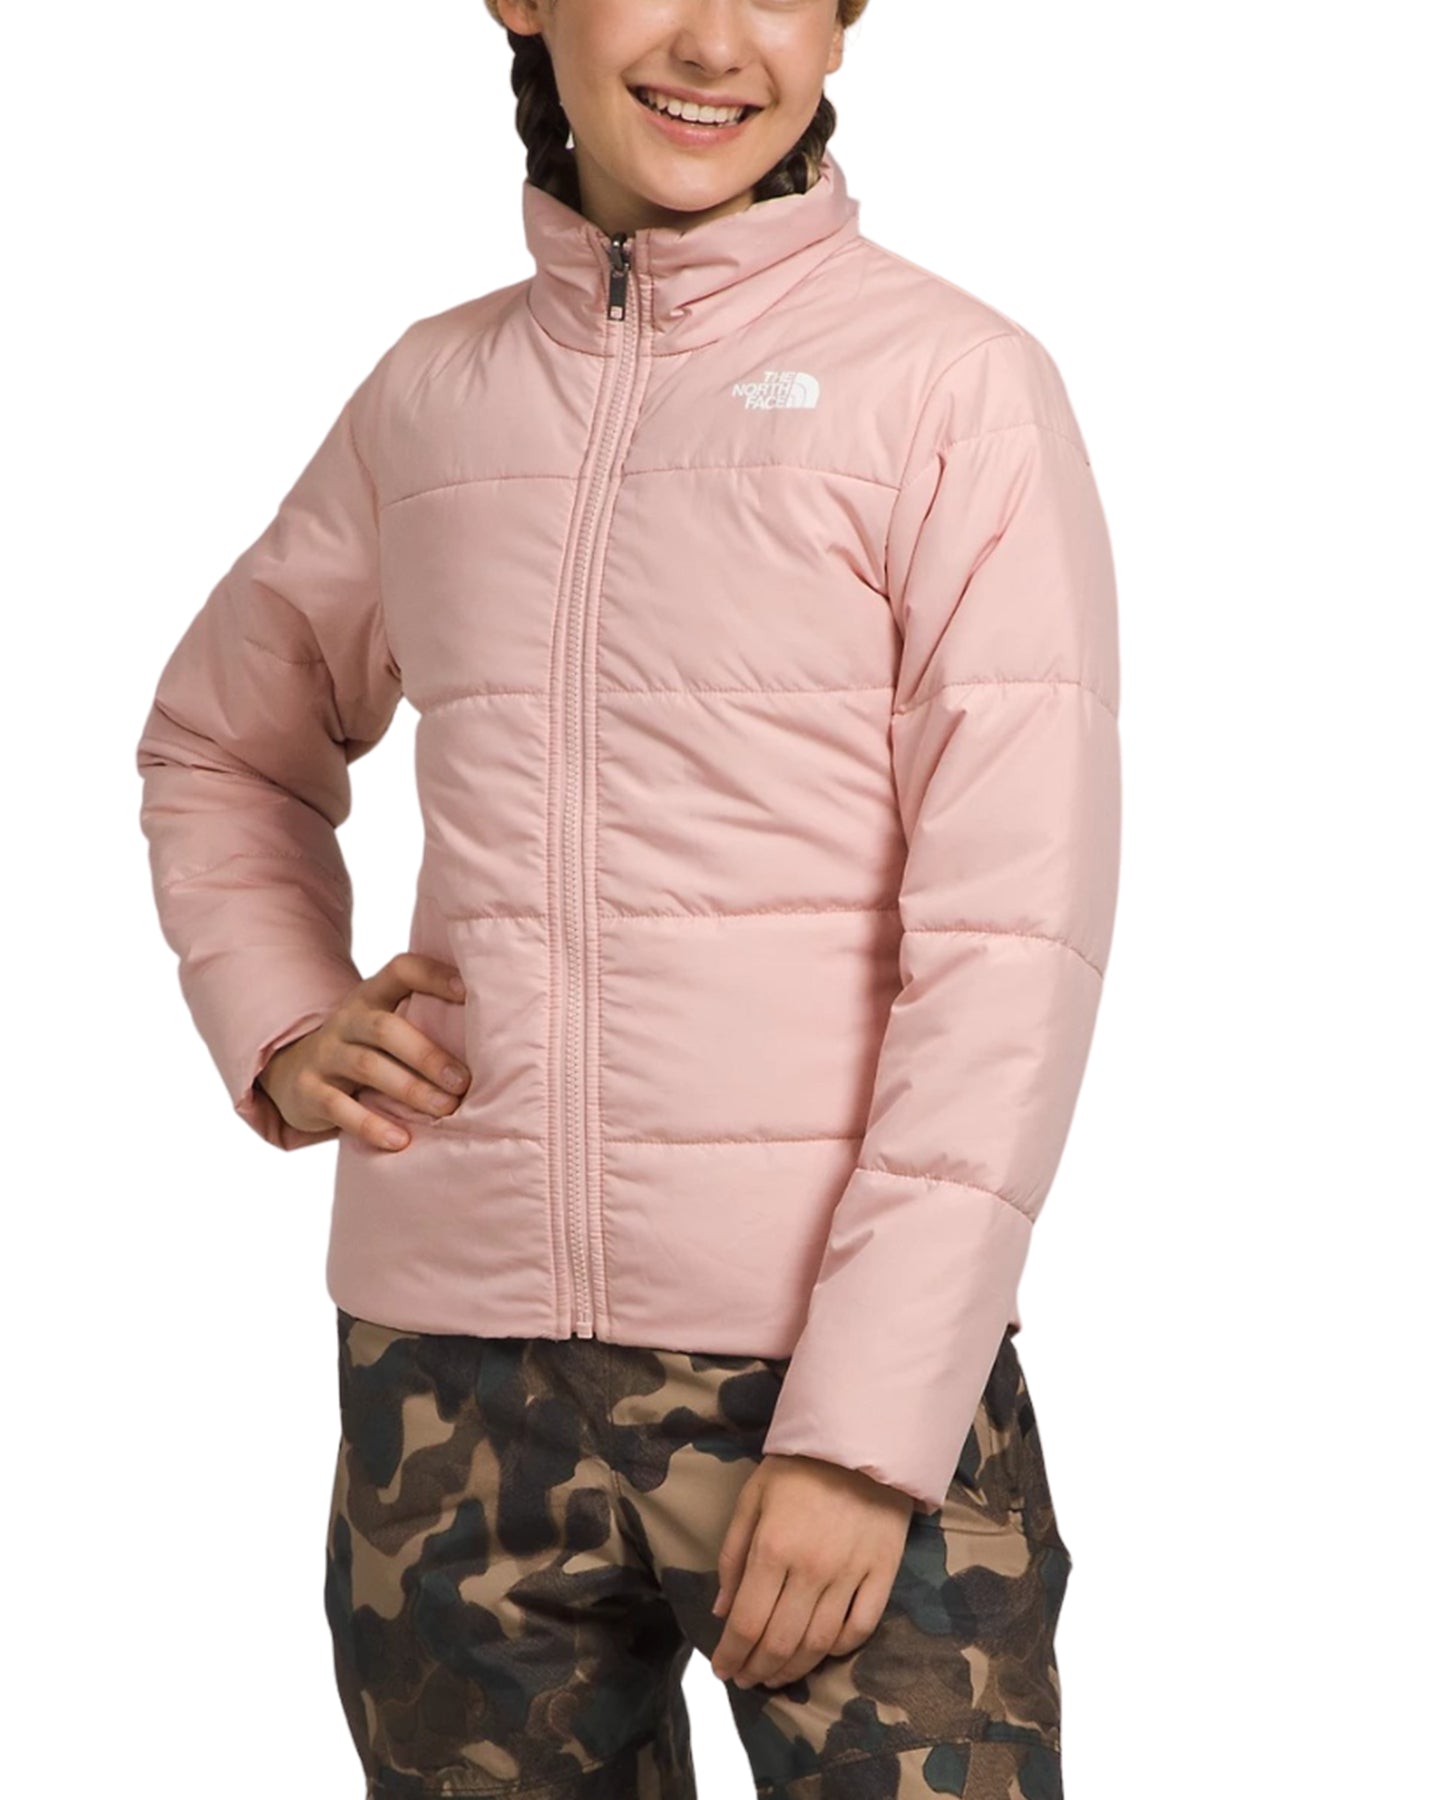 Girls Waterproof Jackets | The North Face NZ